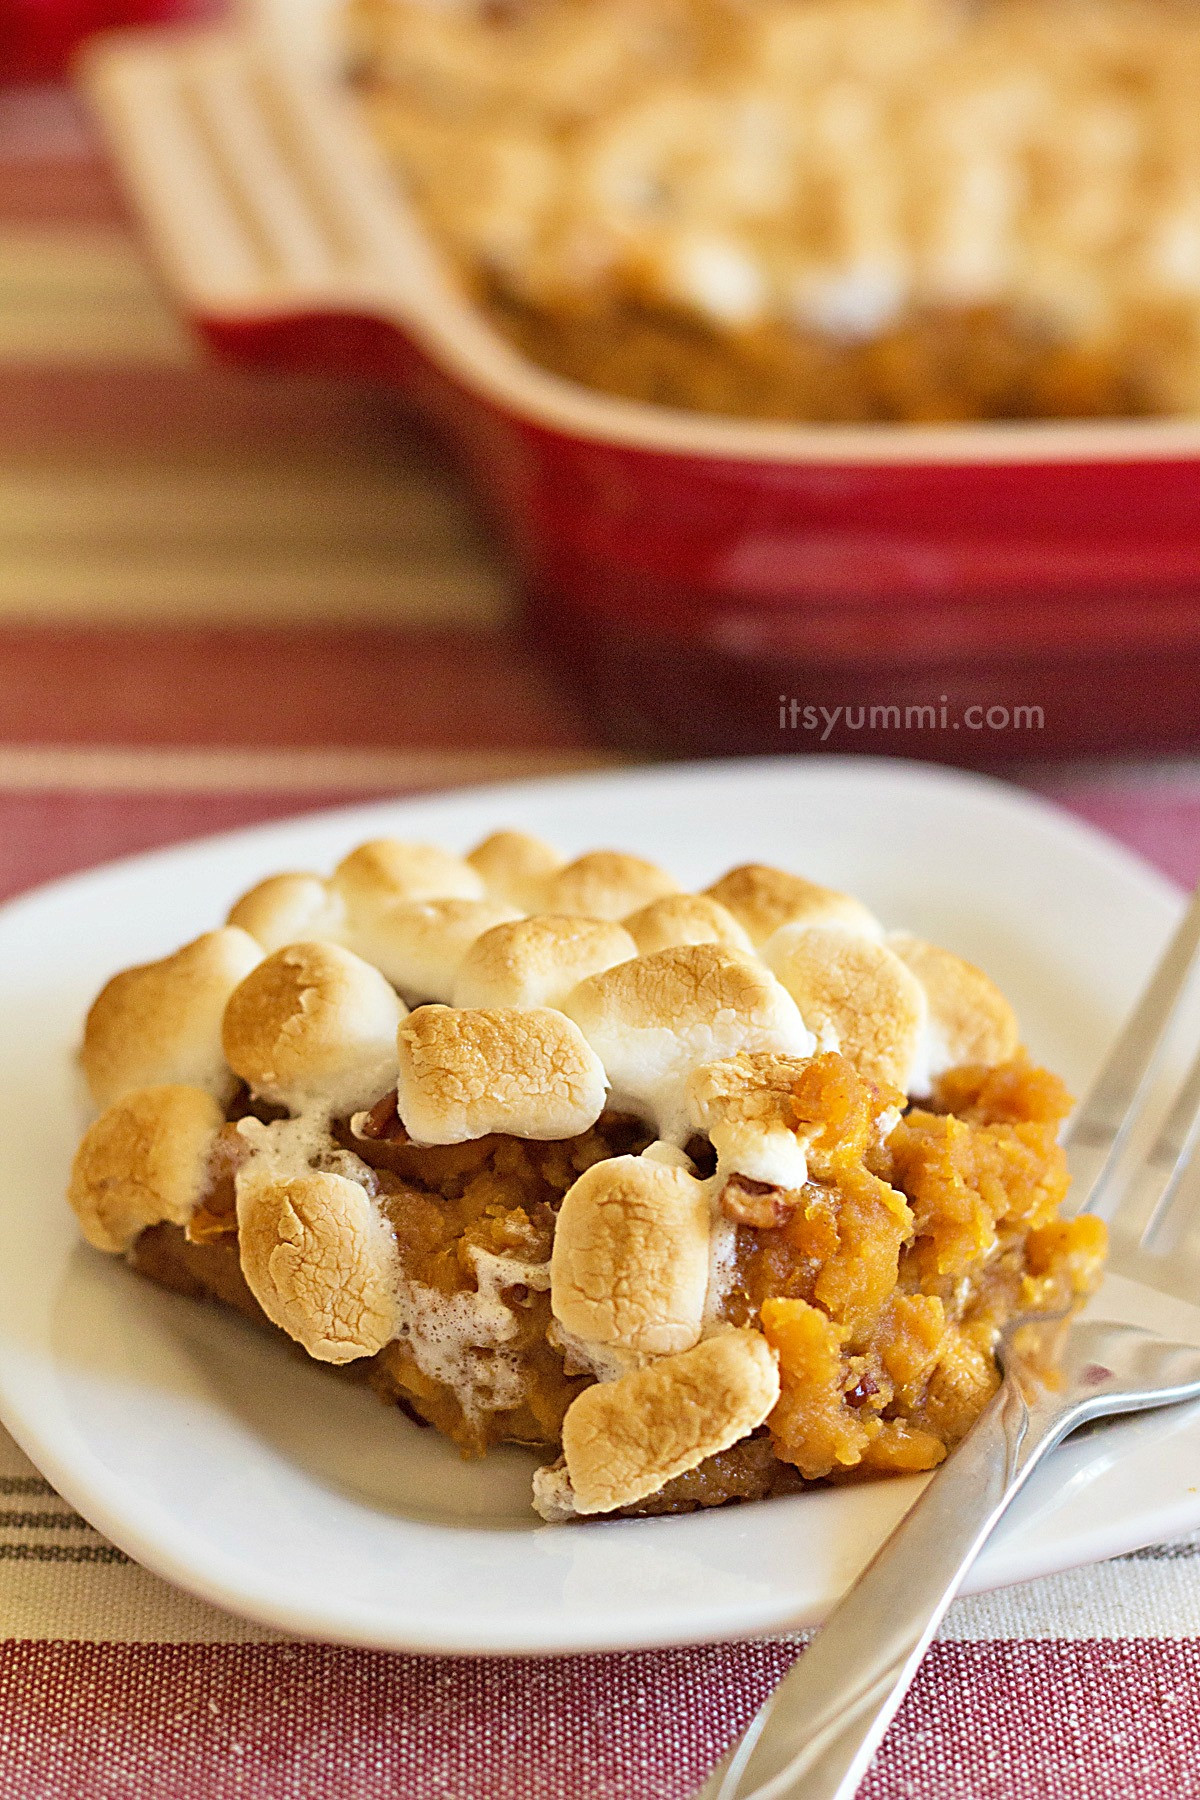 Sweet Potato Casserole With Marshmallow
 Canned Sweet Potato Casserole with Marshmallows